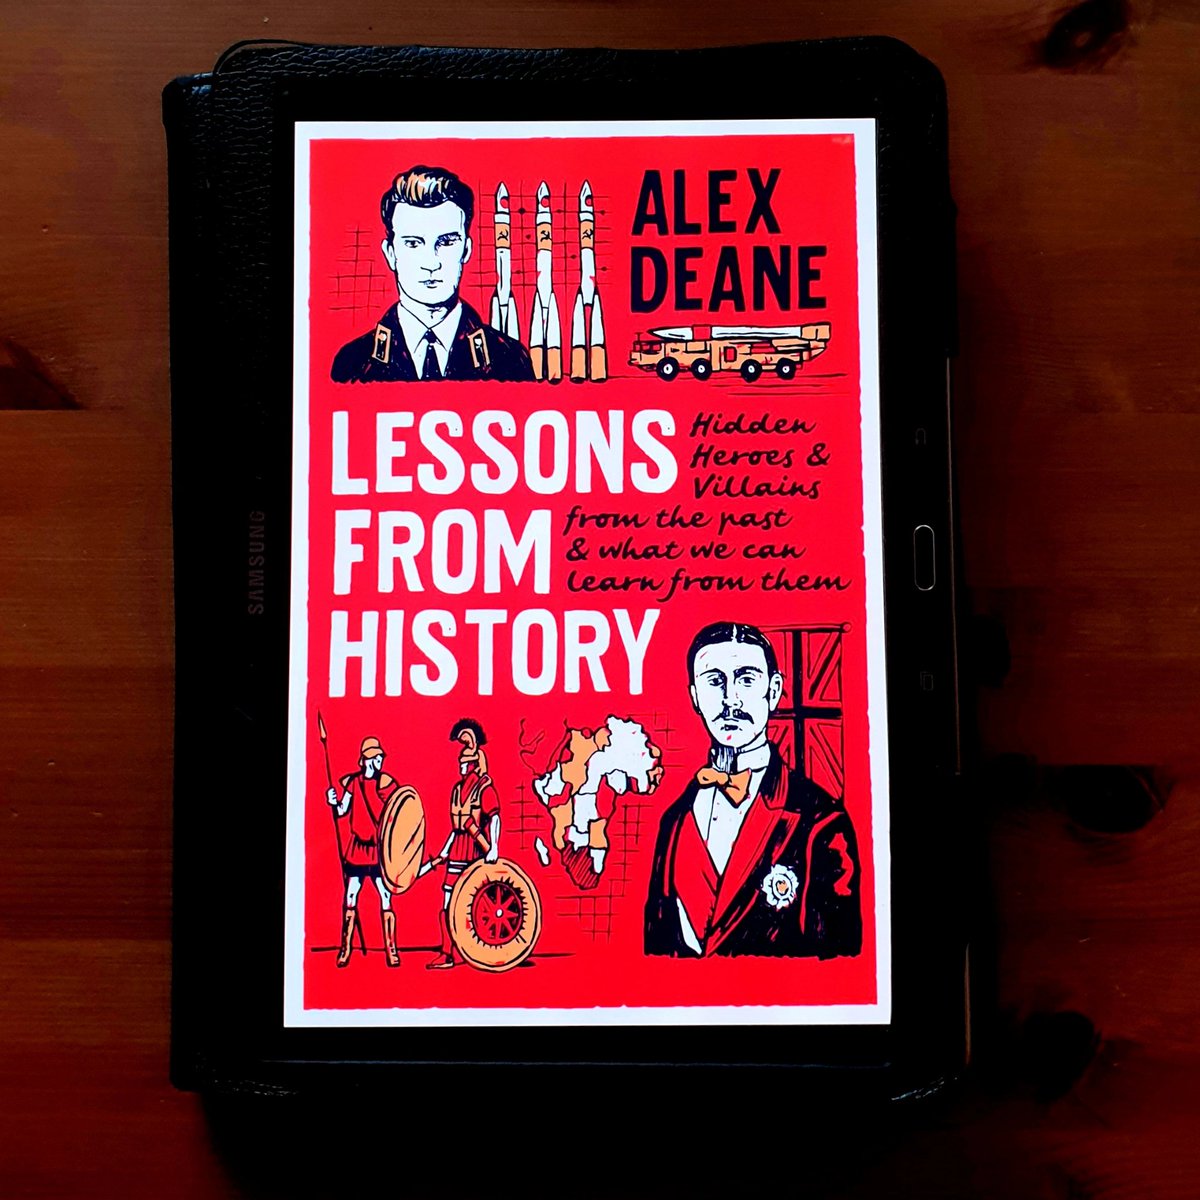 @ajcdeane I waited til mid-night to download your debut first book via my kindle and I have to say that I am throughly enjoy reading it as I can't put it down.
May it be a major bestseller book. Best wishes @Seanielondon #recommendedbook #book  #history #lessonsfromhistory